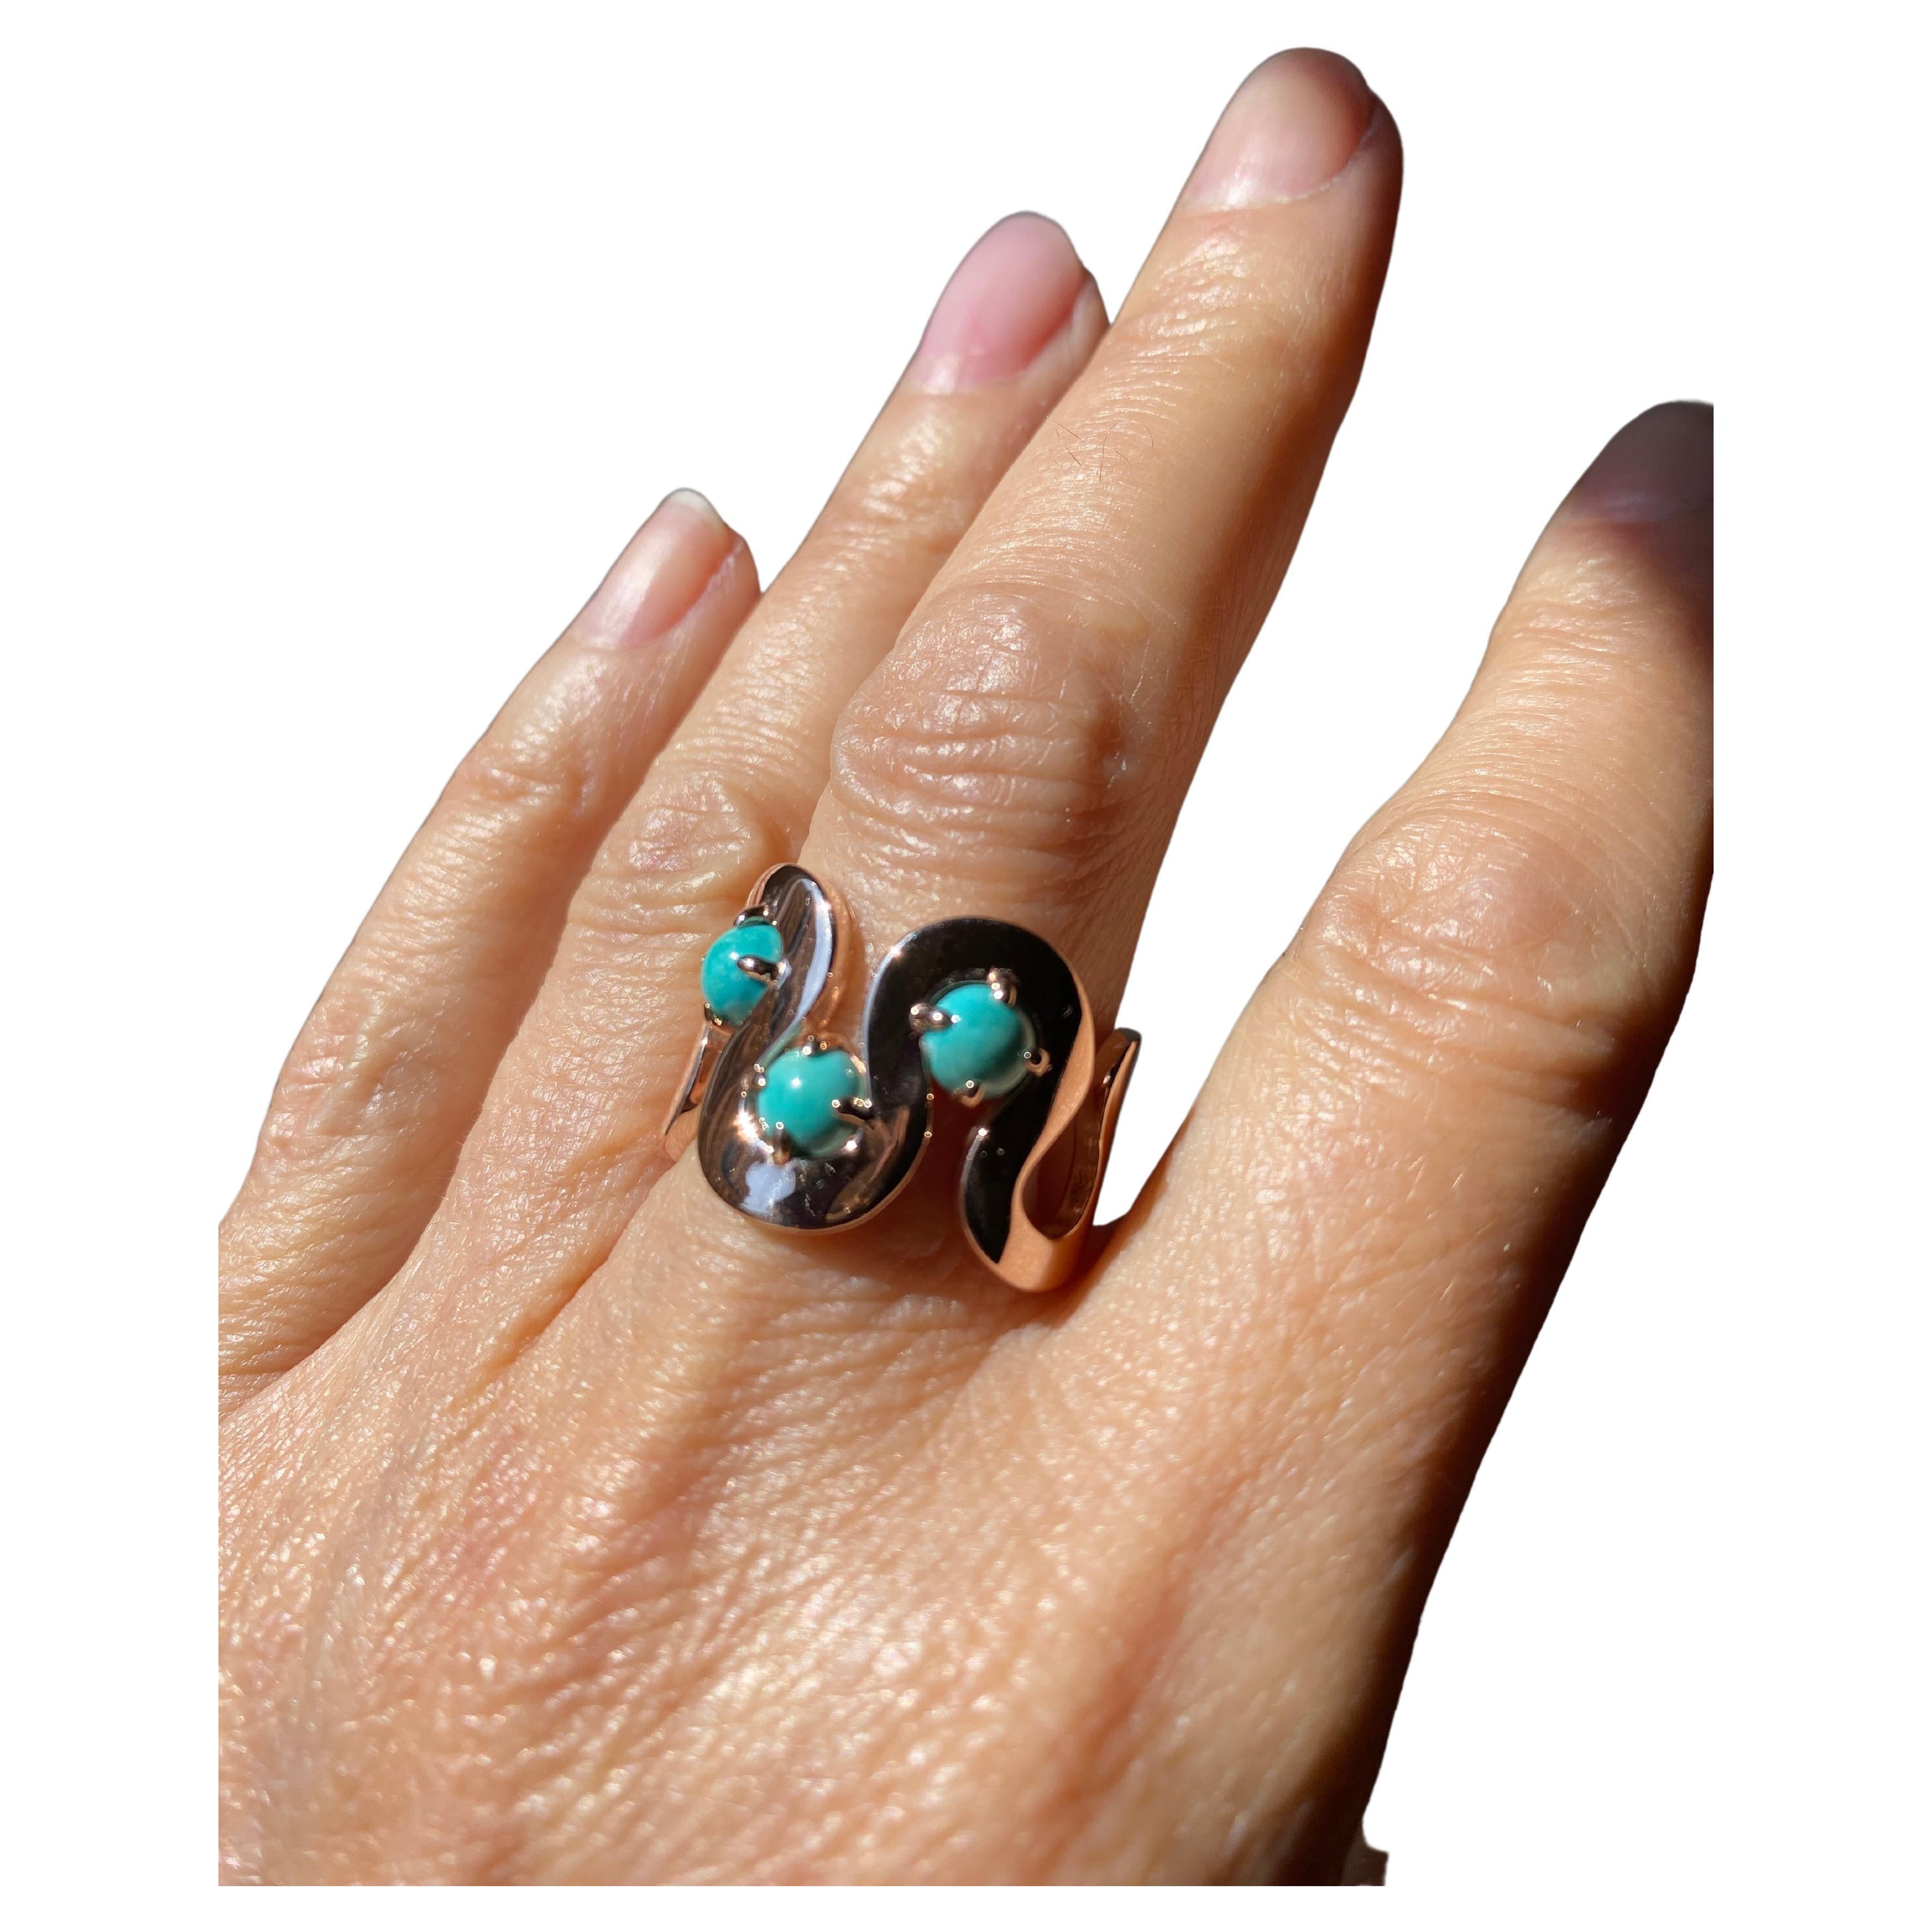 Ocean-Inspired Gold Wave Band Ring Handcrafted in Italy with Turquoise Trilogy